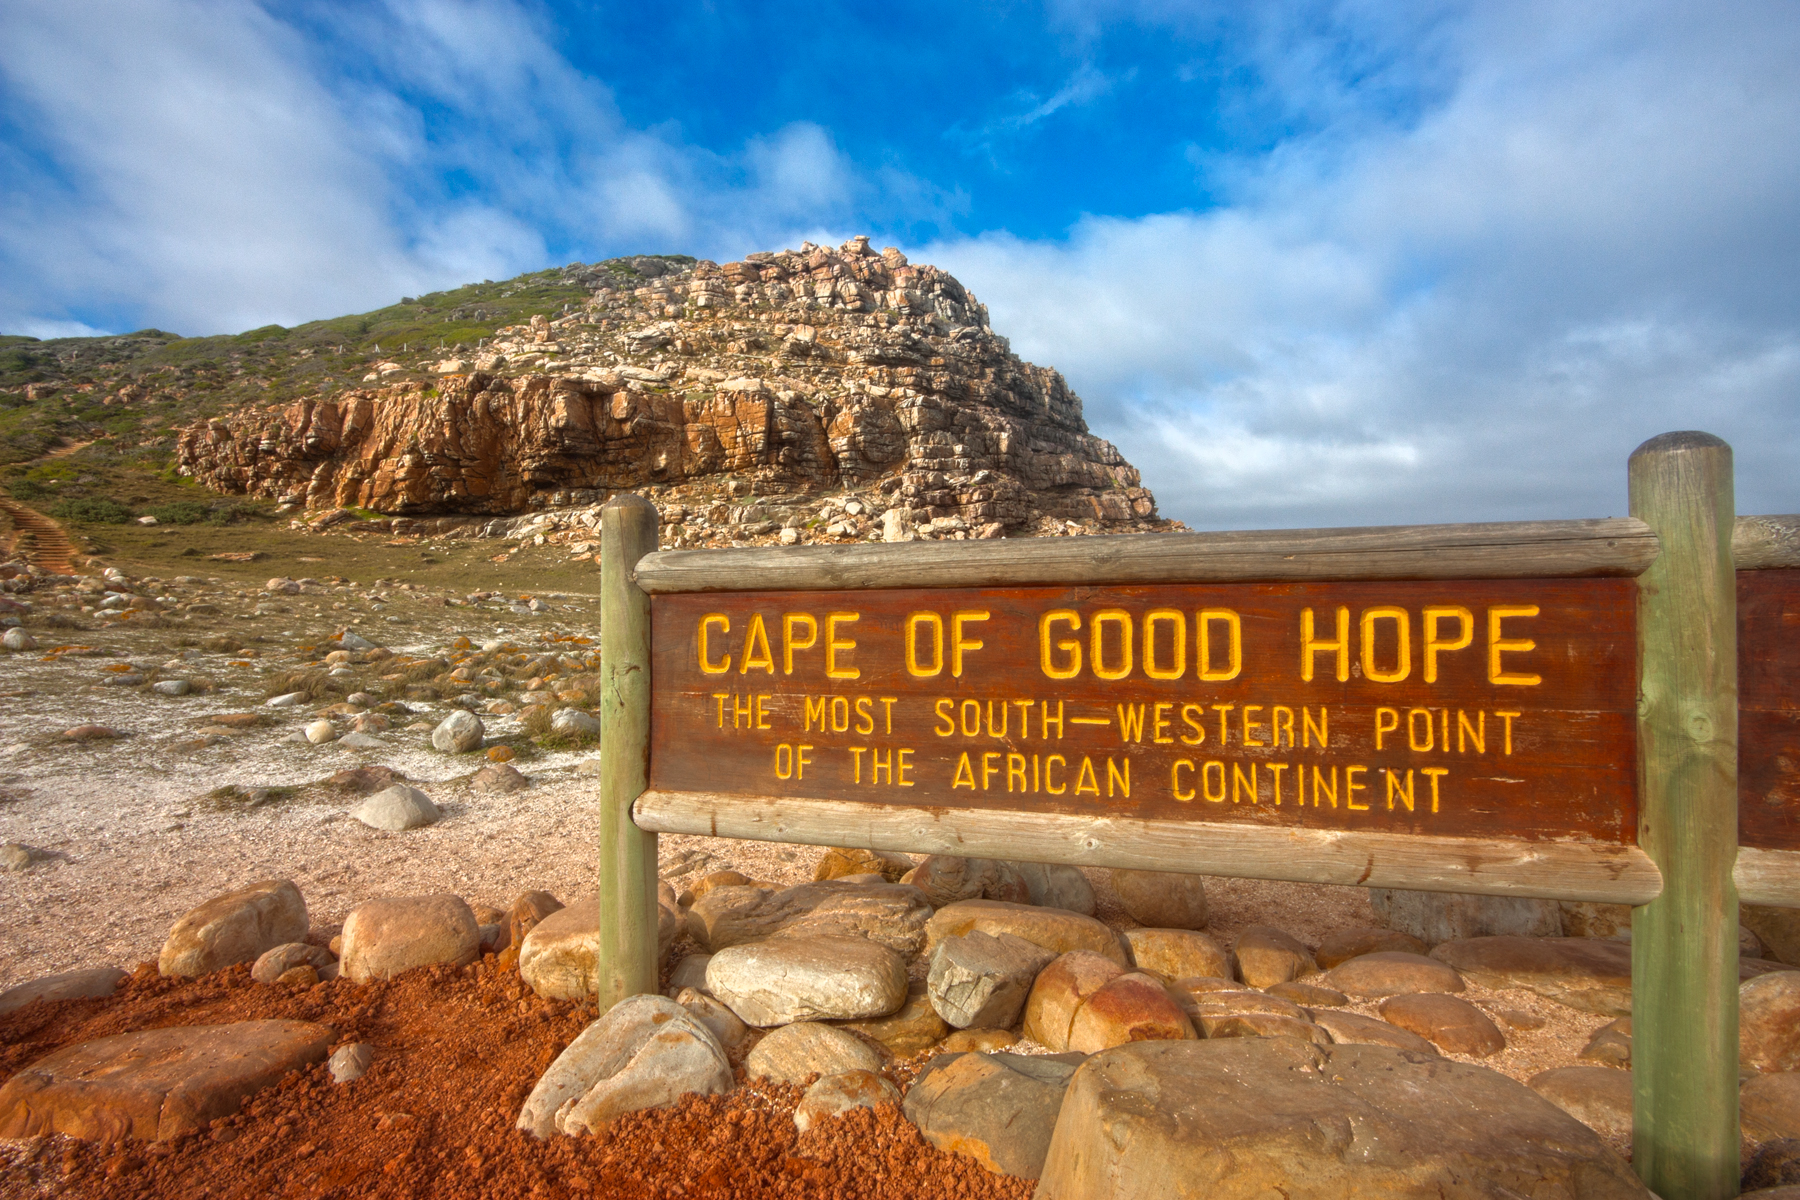 Cape of good hope - hdr photo